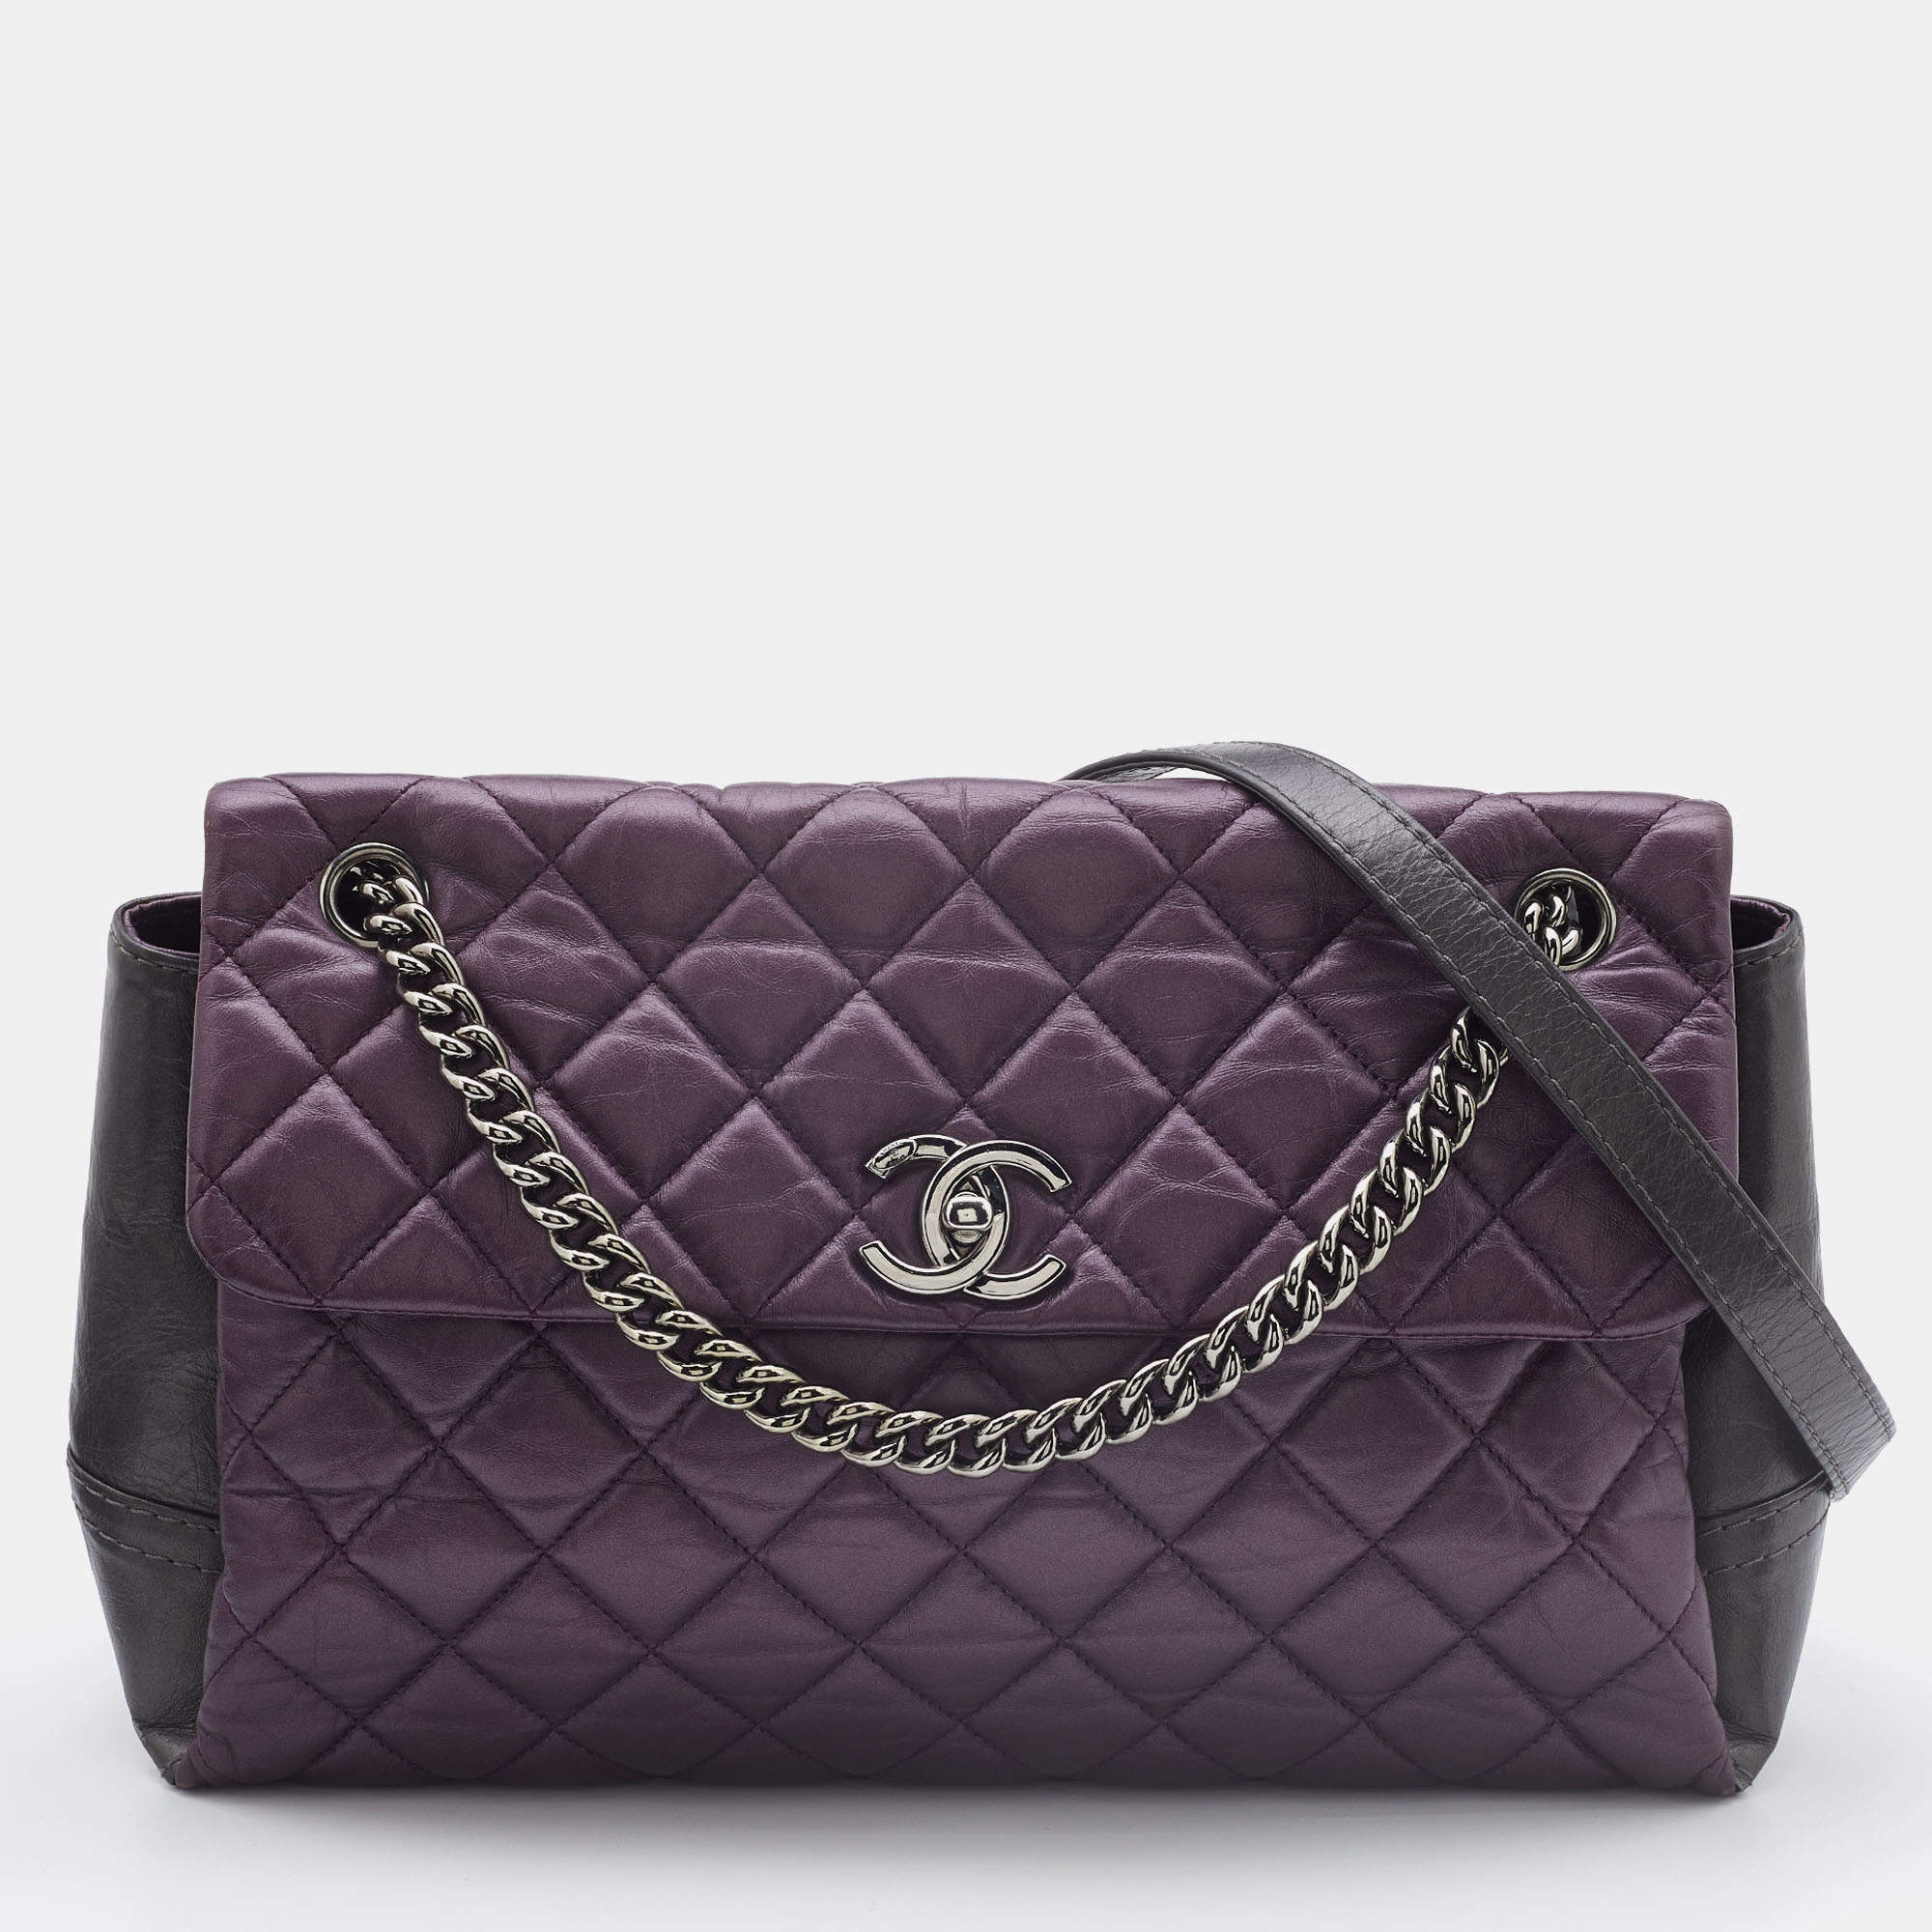 Will changing the lining in a Chanel handbag lessen its value? - Quora